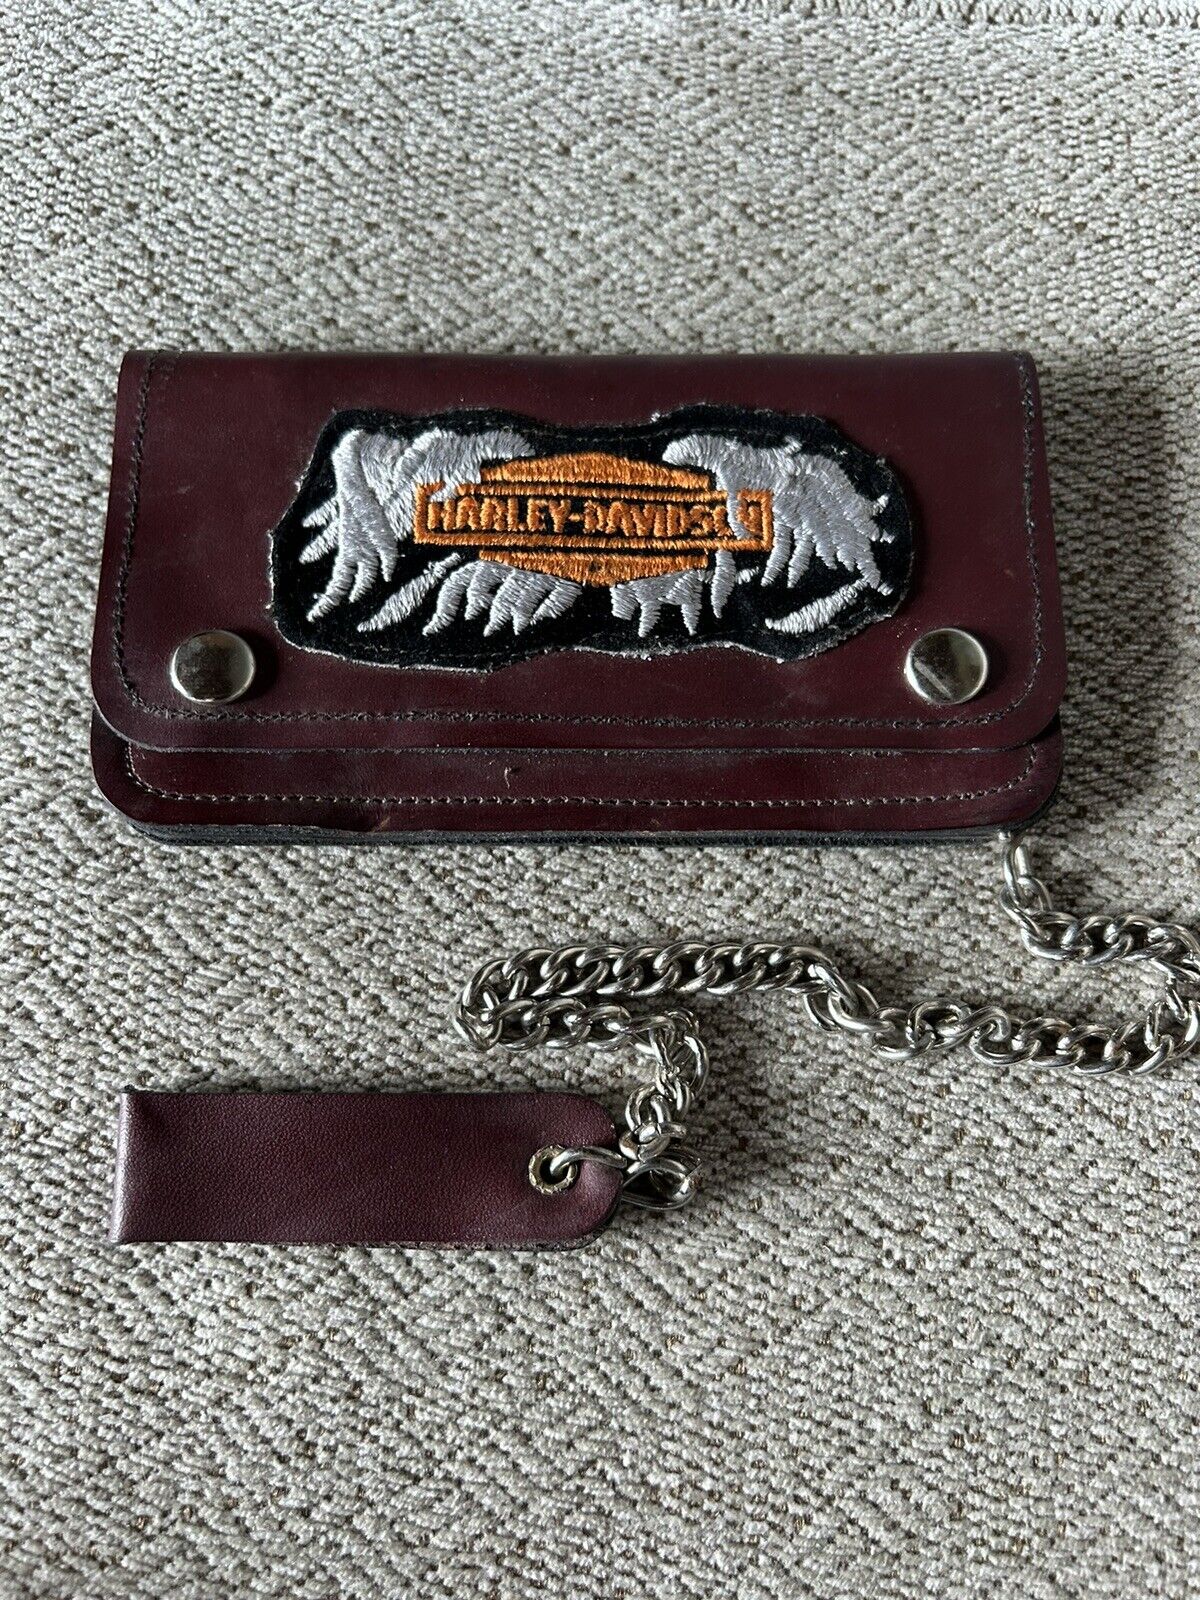 VINTAGE NOS HARLEY DAVIDSON LEATHER WALLET WITH CHAIN